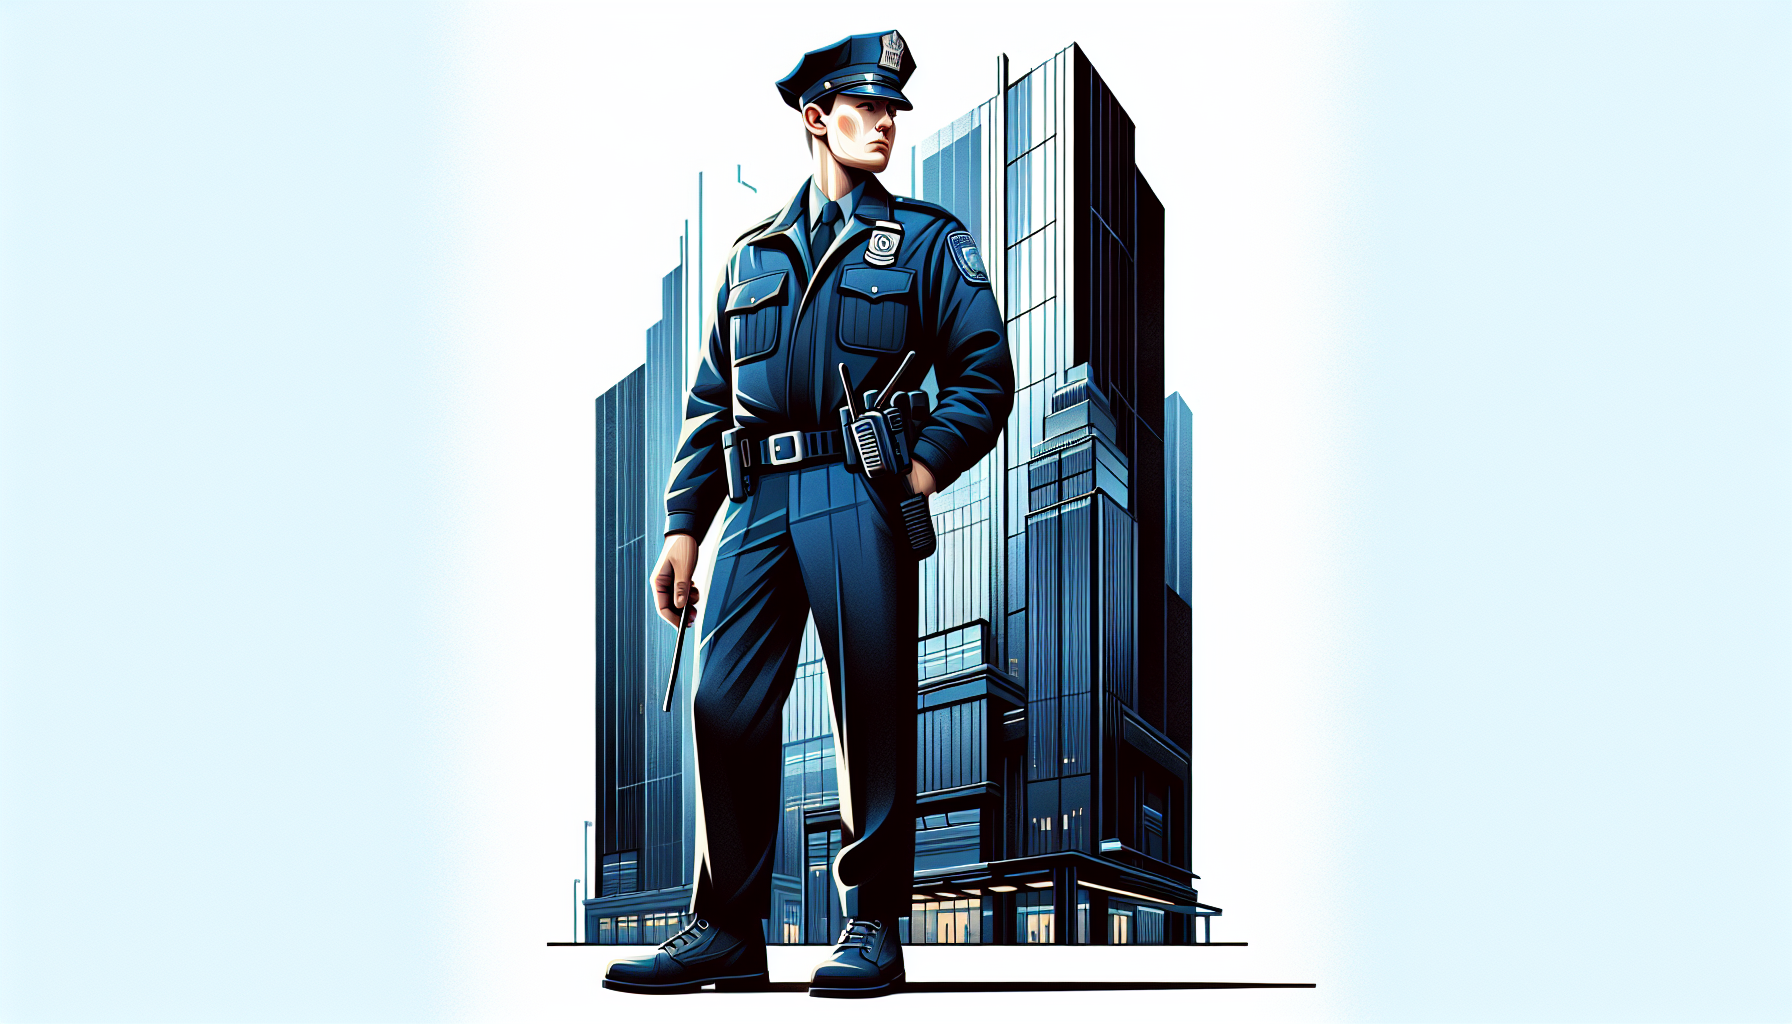 Illustration of a security guard monitoring a premises